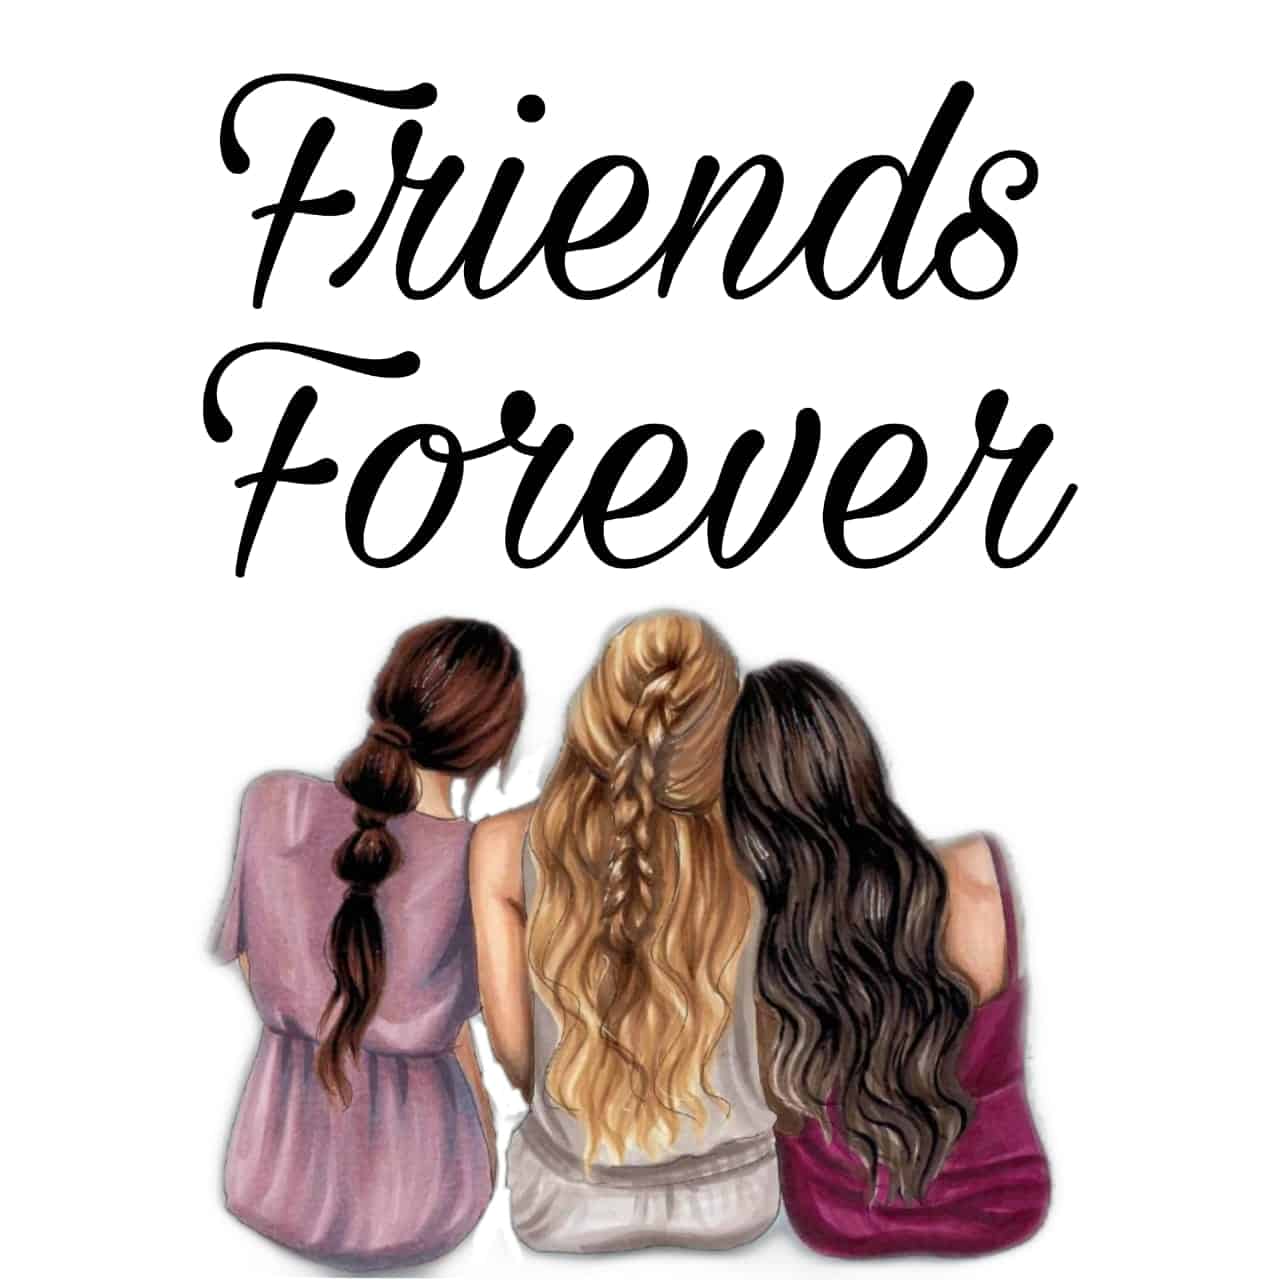 Profile Friends Forever DP